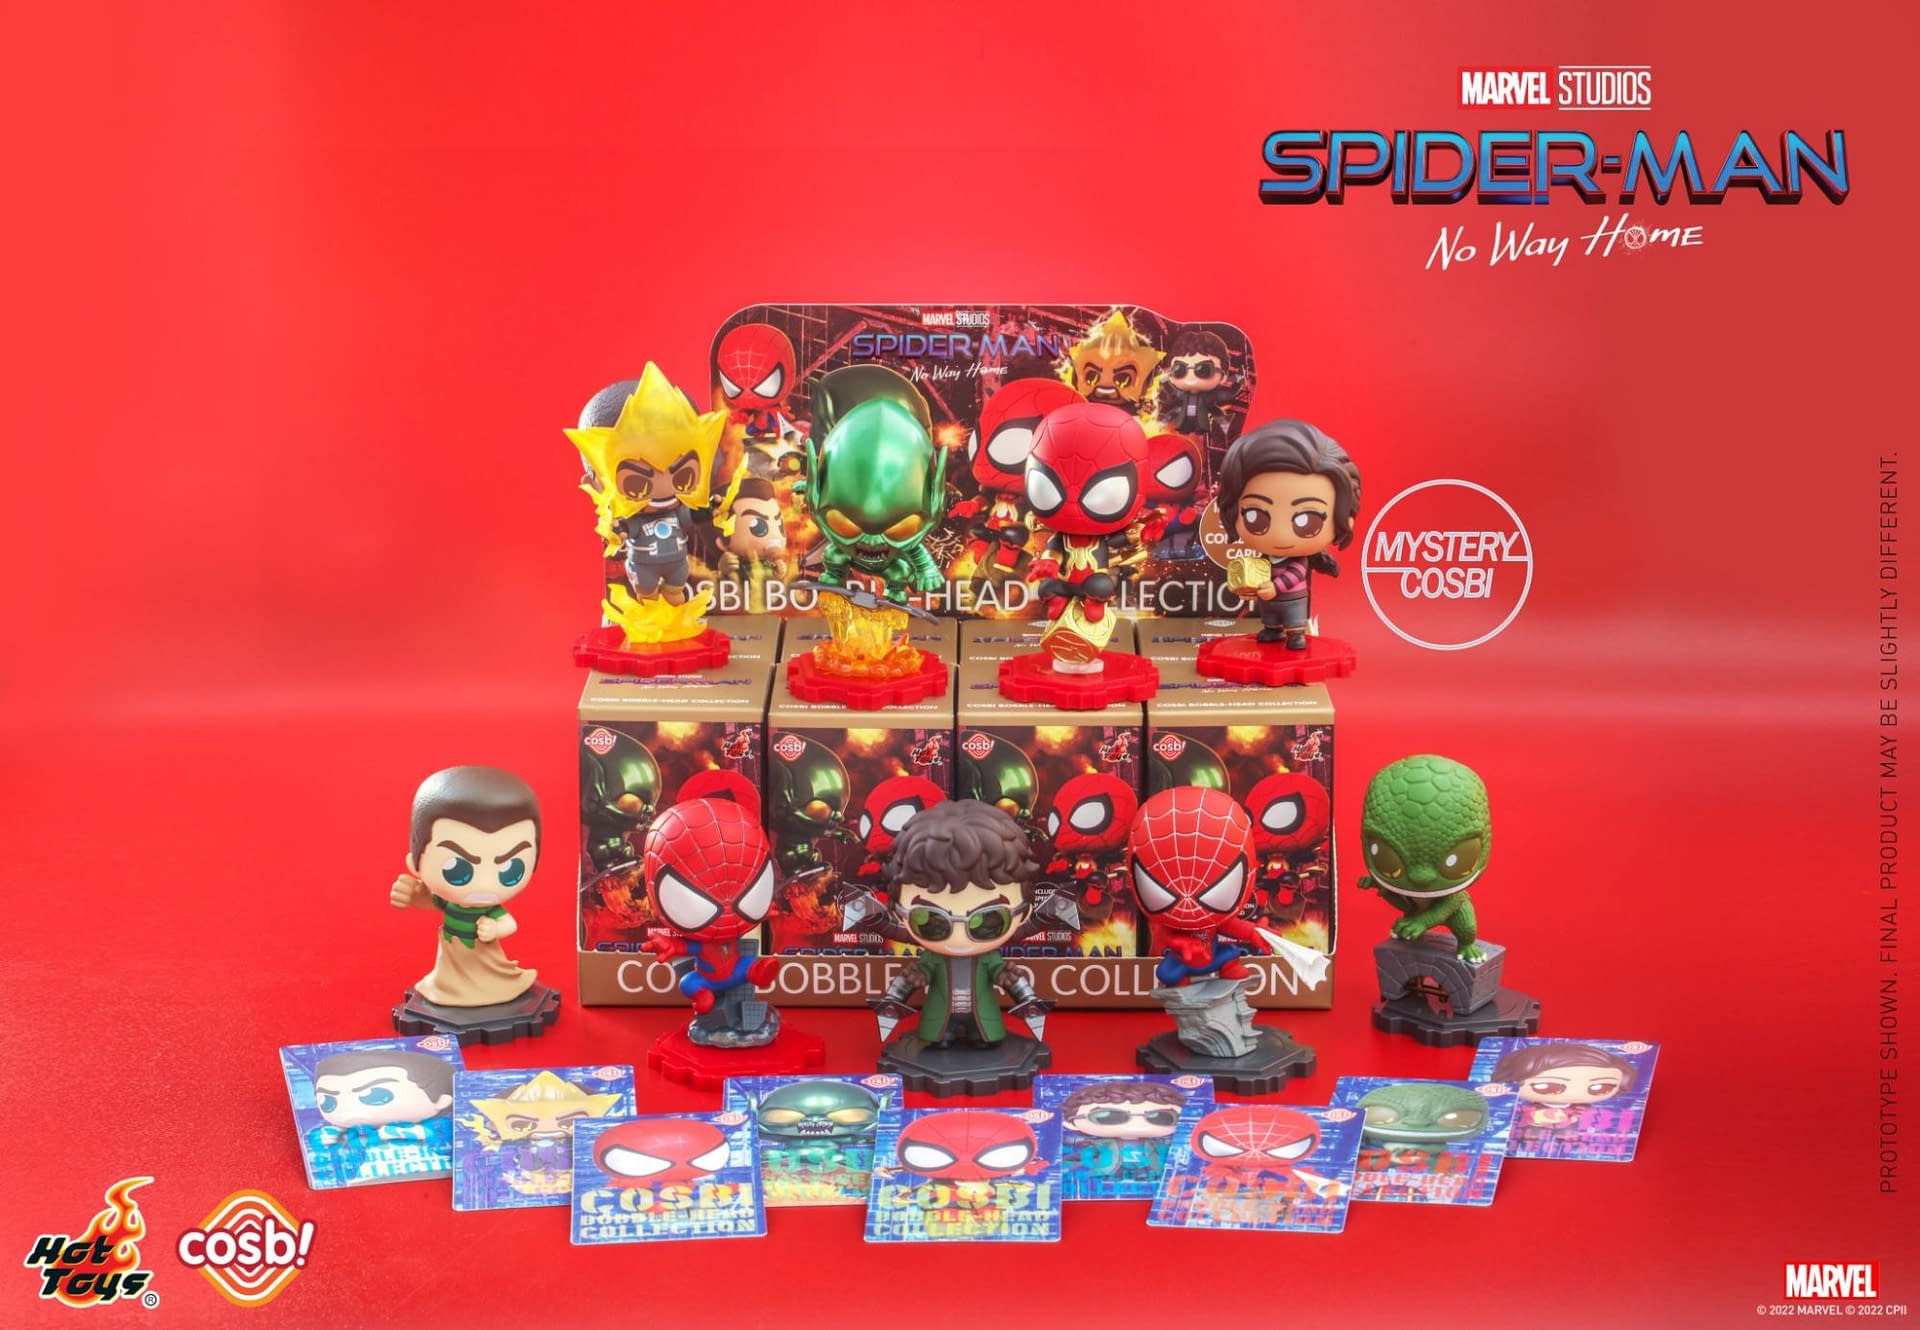 Hot Toys Swings On In with New Spider-Man: No Way Home Cosbi Minis